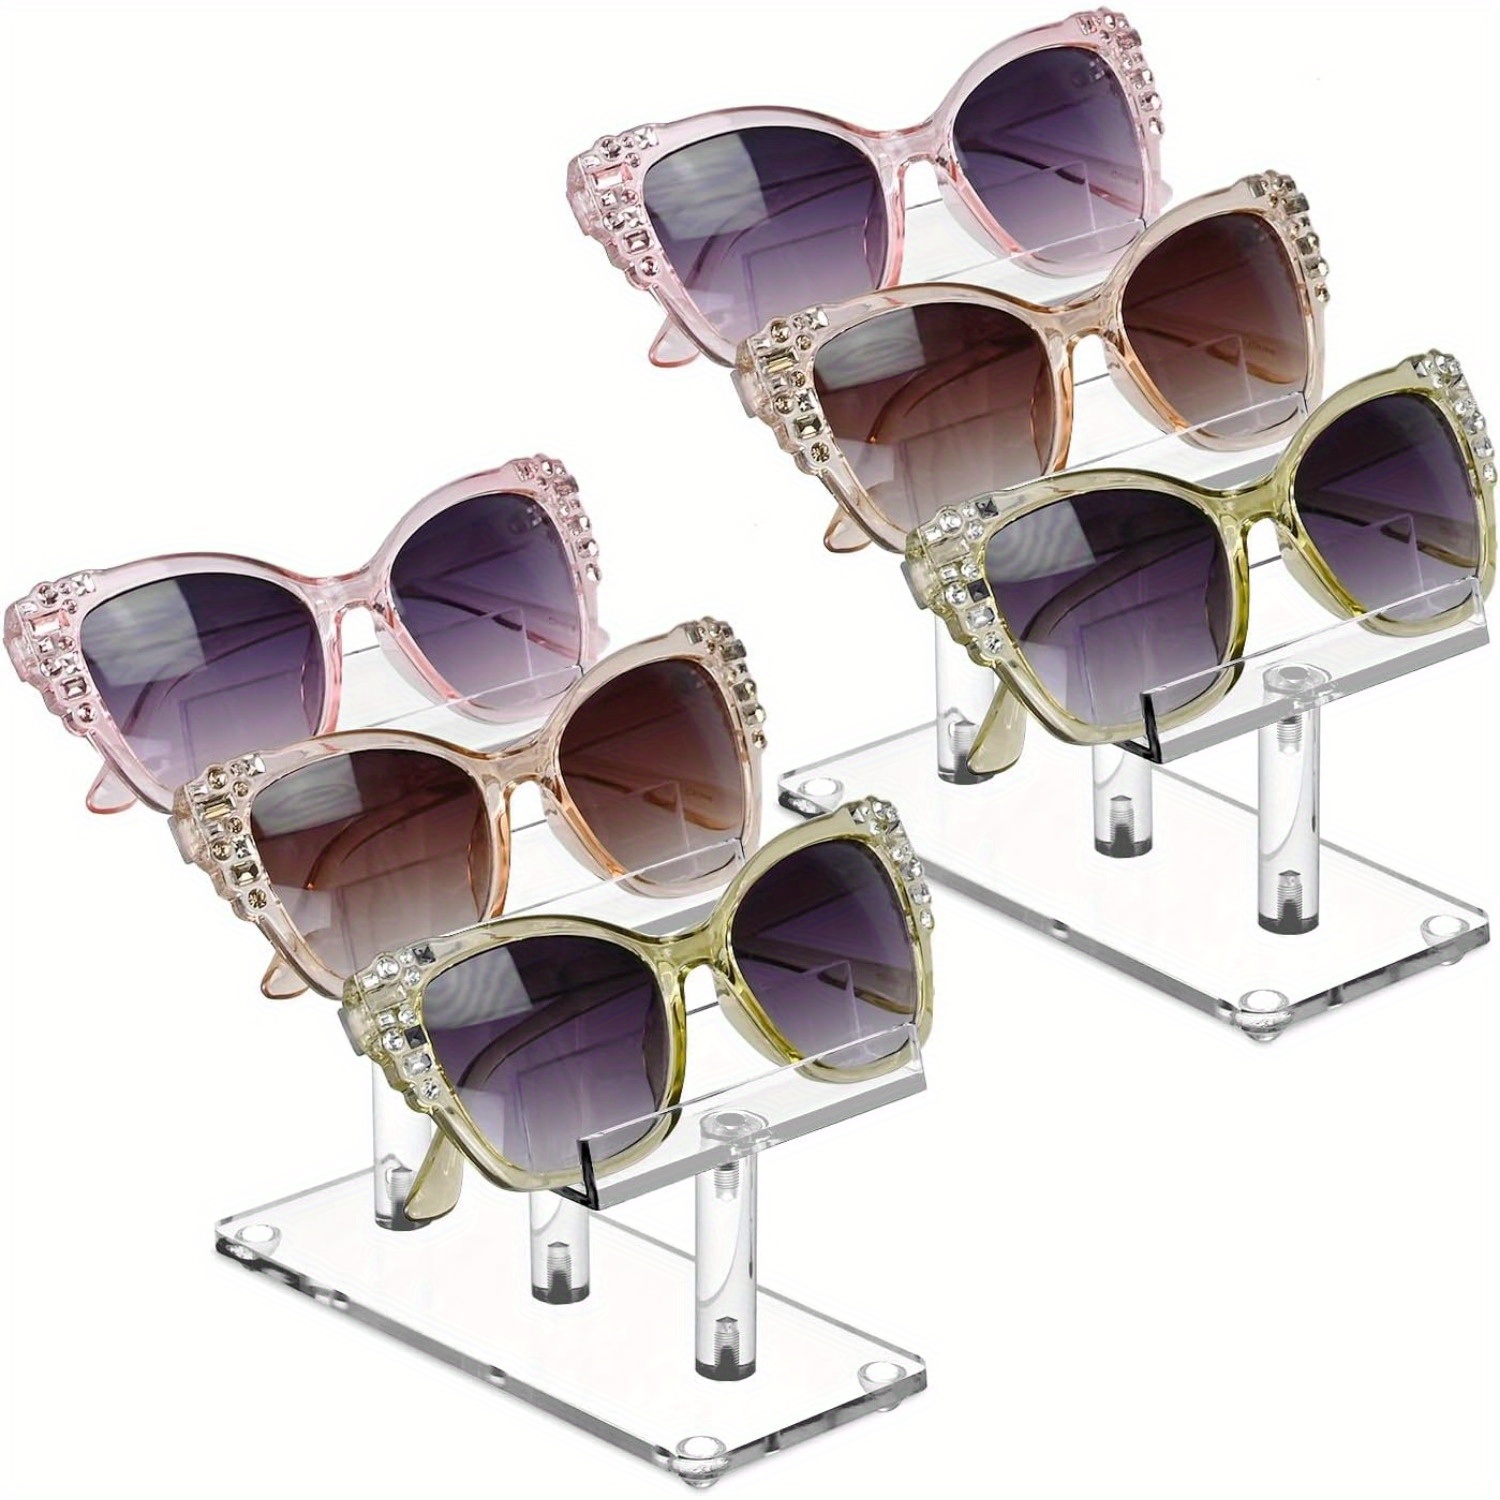 

1pc/2 Pcs 3 Tiers Acrylic Eyewear Display Stand, Sunglasses Rack Holder For Shops, Sunglasses Stand, Eyewear Organizer For Eyeglasses And Sunglasses For Shops